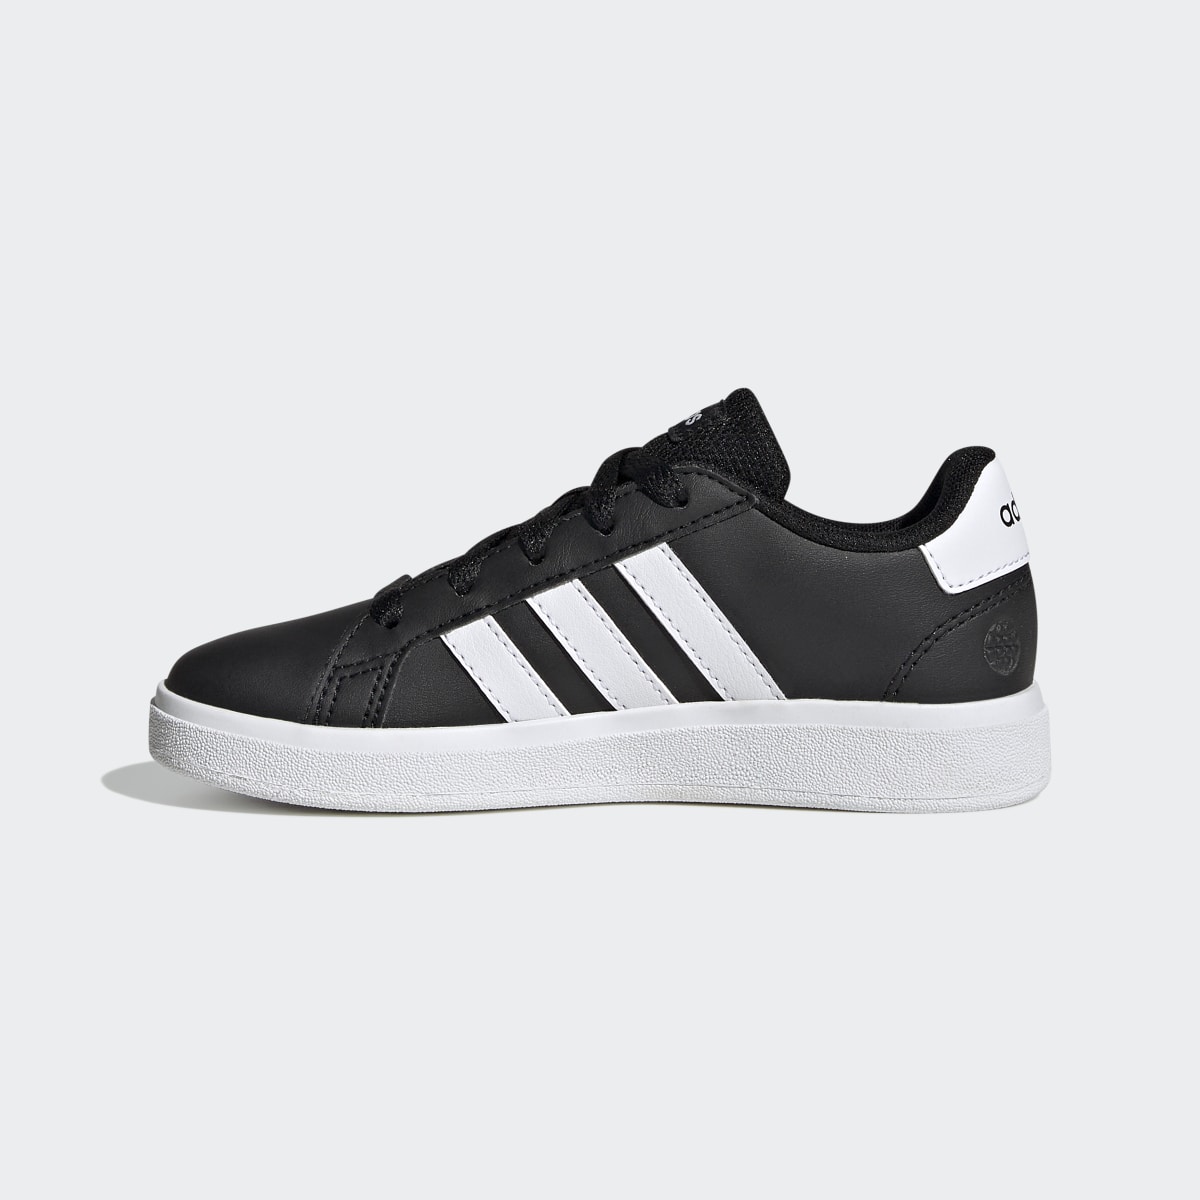 Adidas Grand Court Lifestyle Tennis Lace-Up Schuh. 7